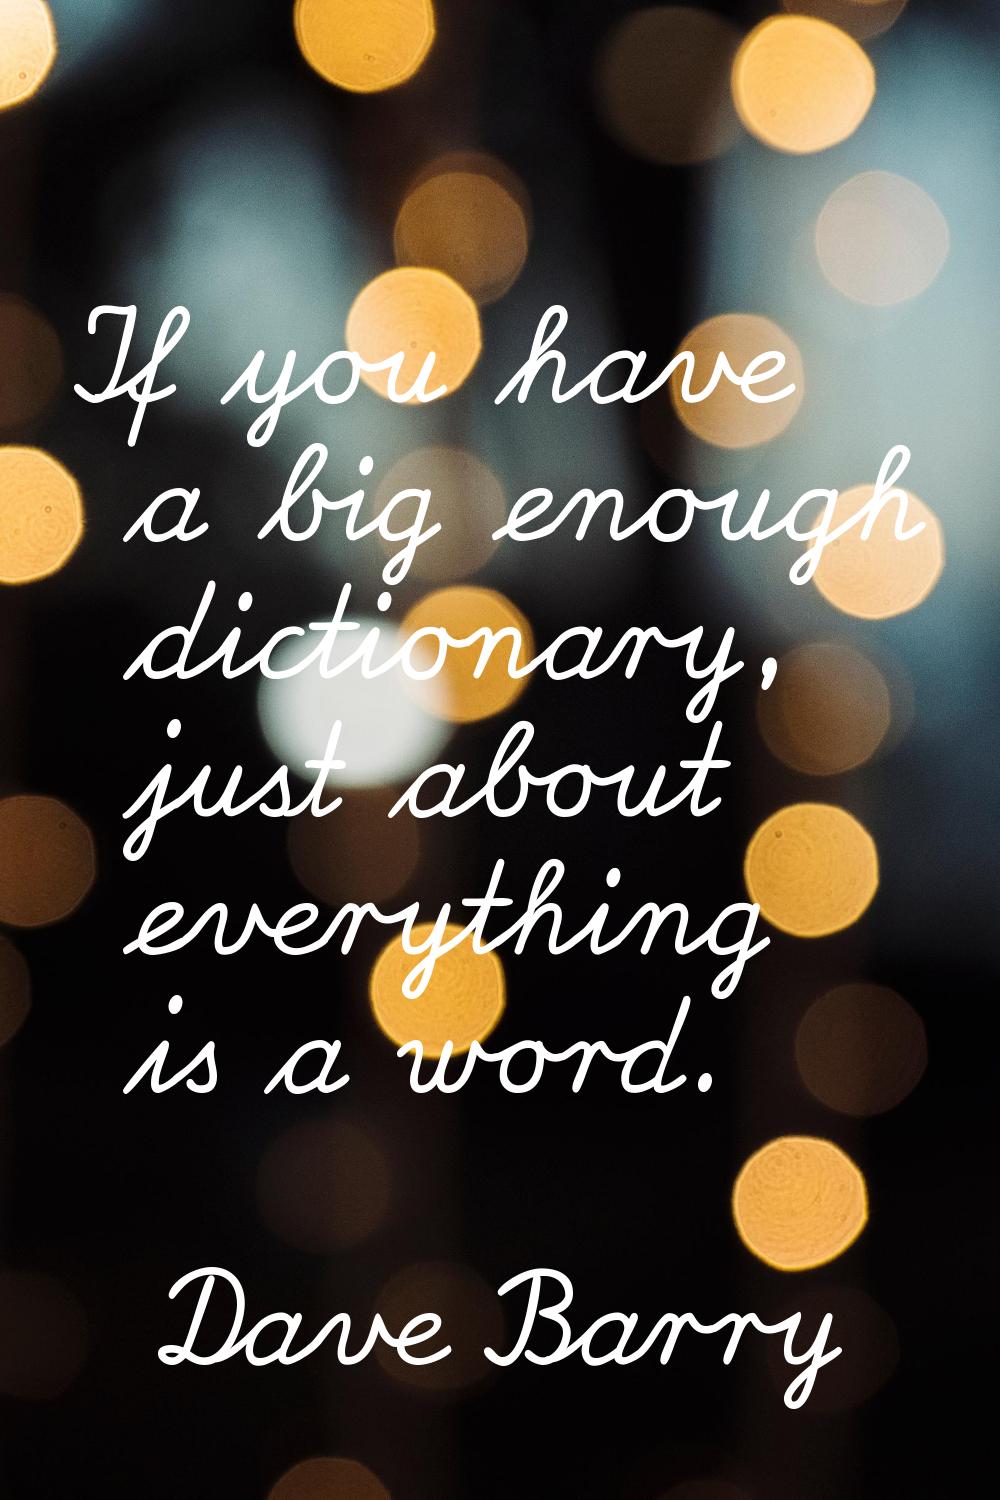 If you have a big enough dictionary, just about everything is a word.